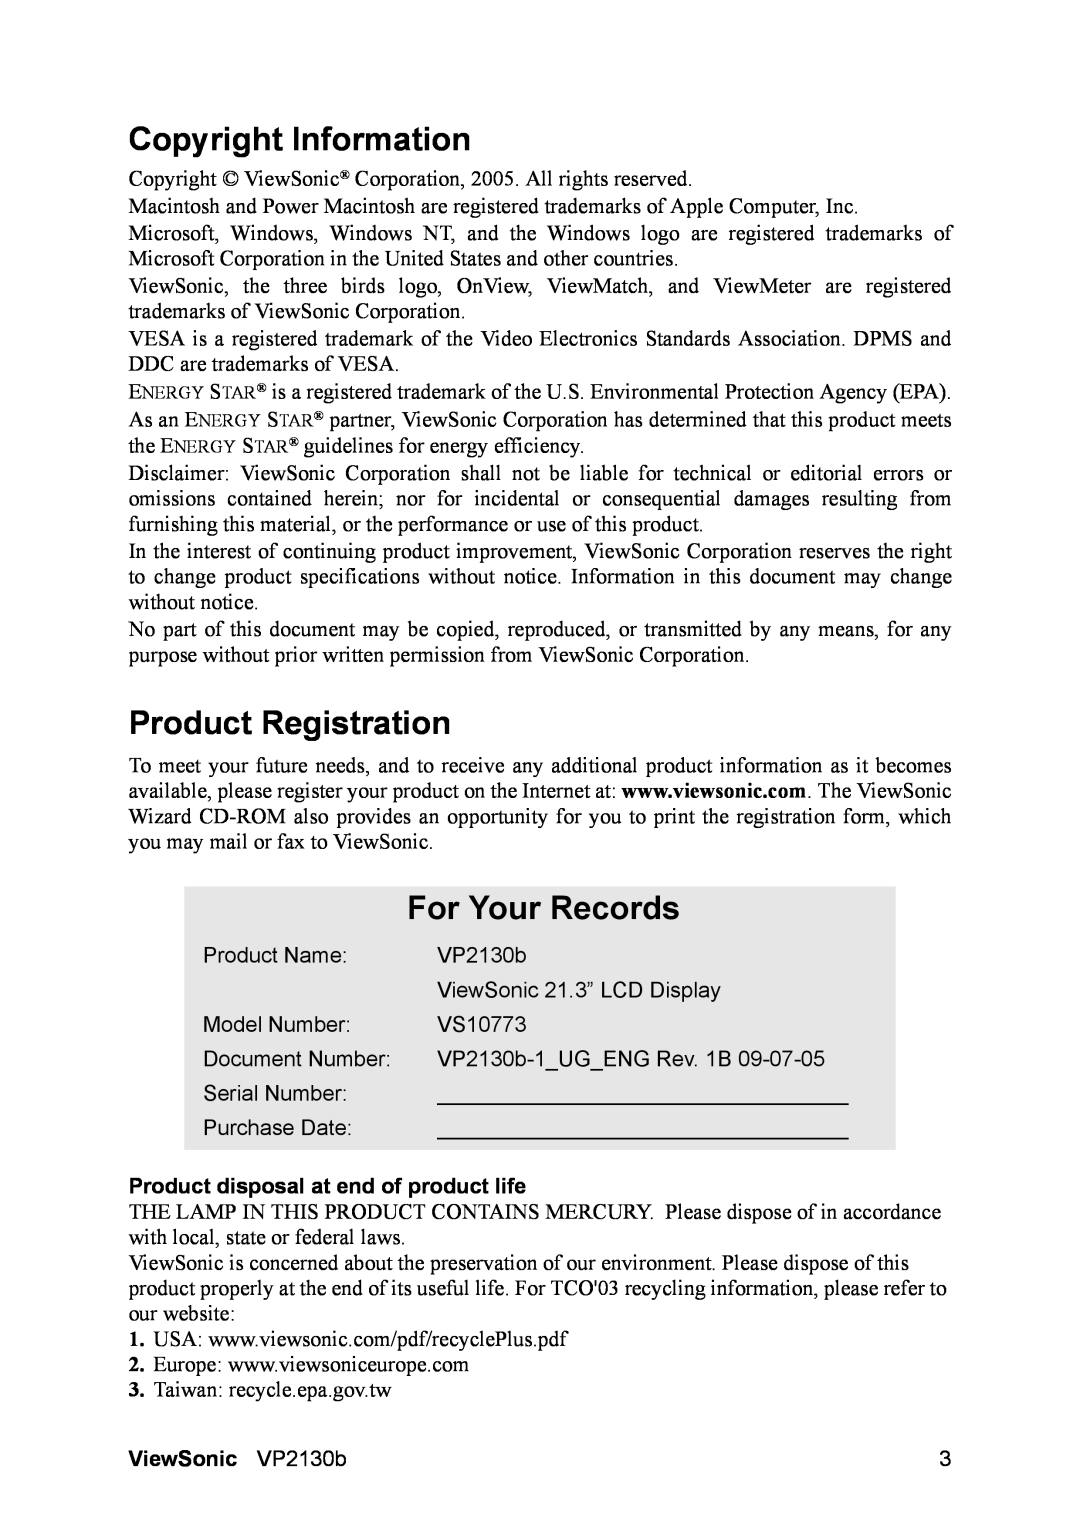 ViewSonic VP2130B Copyright Information, Product Registration, For Your Records, Product disposal at end of product life 